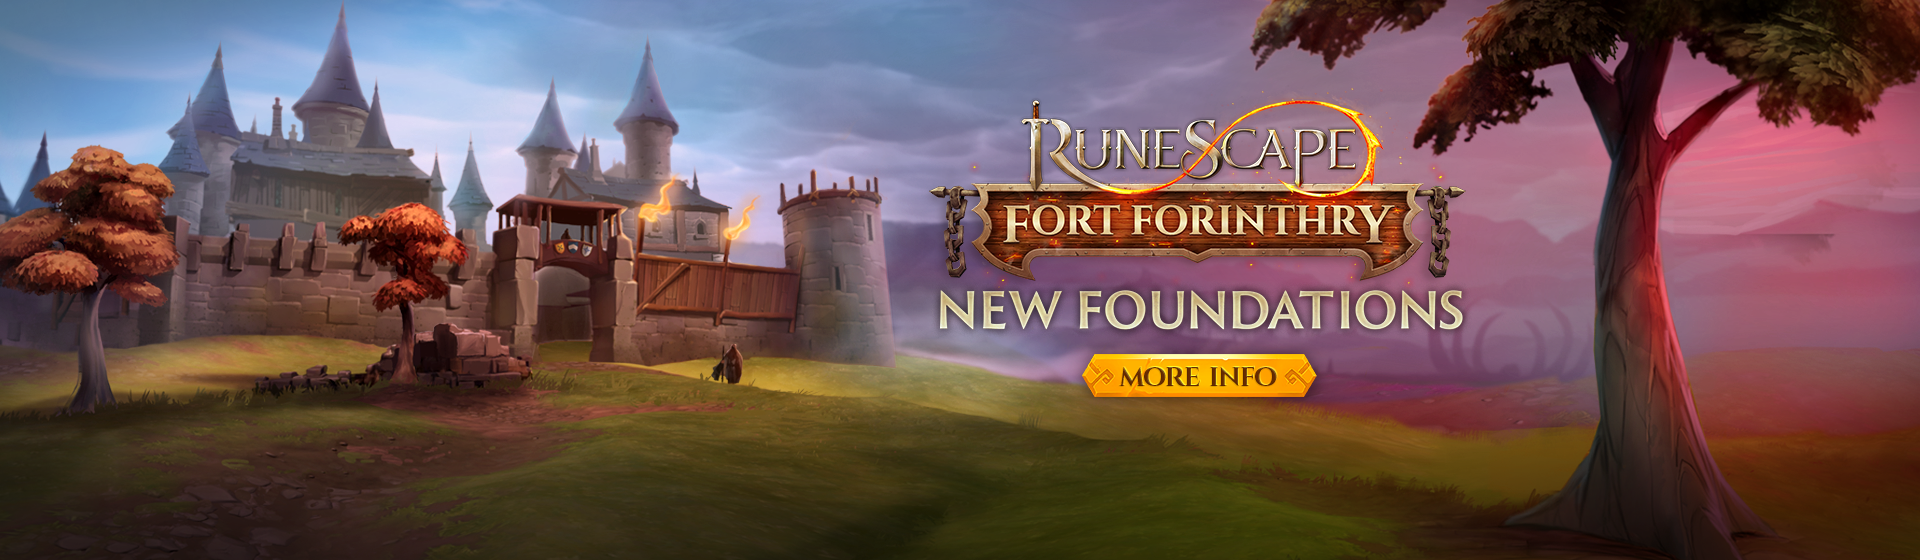 Fort Forinthry: New Foundations